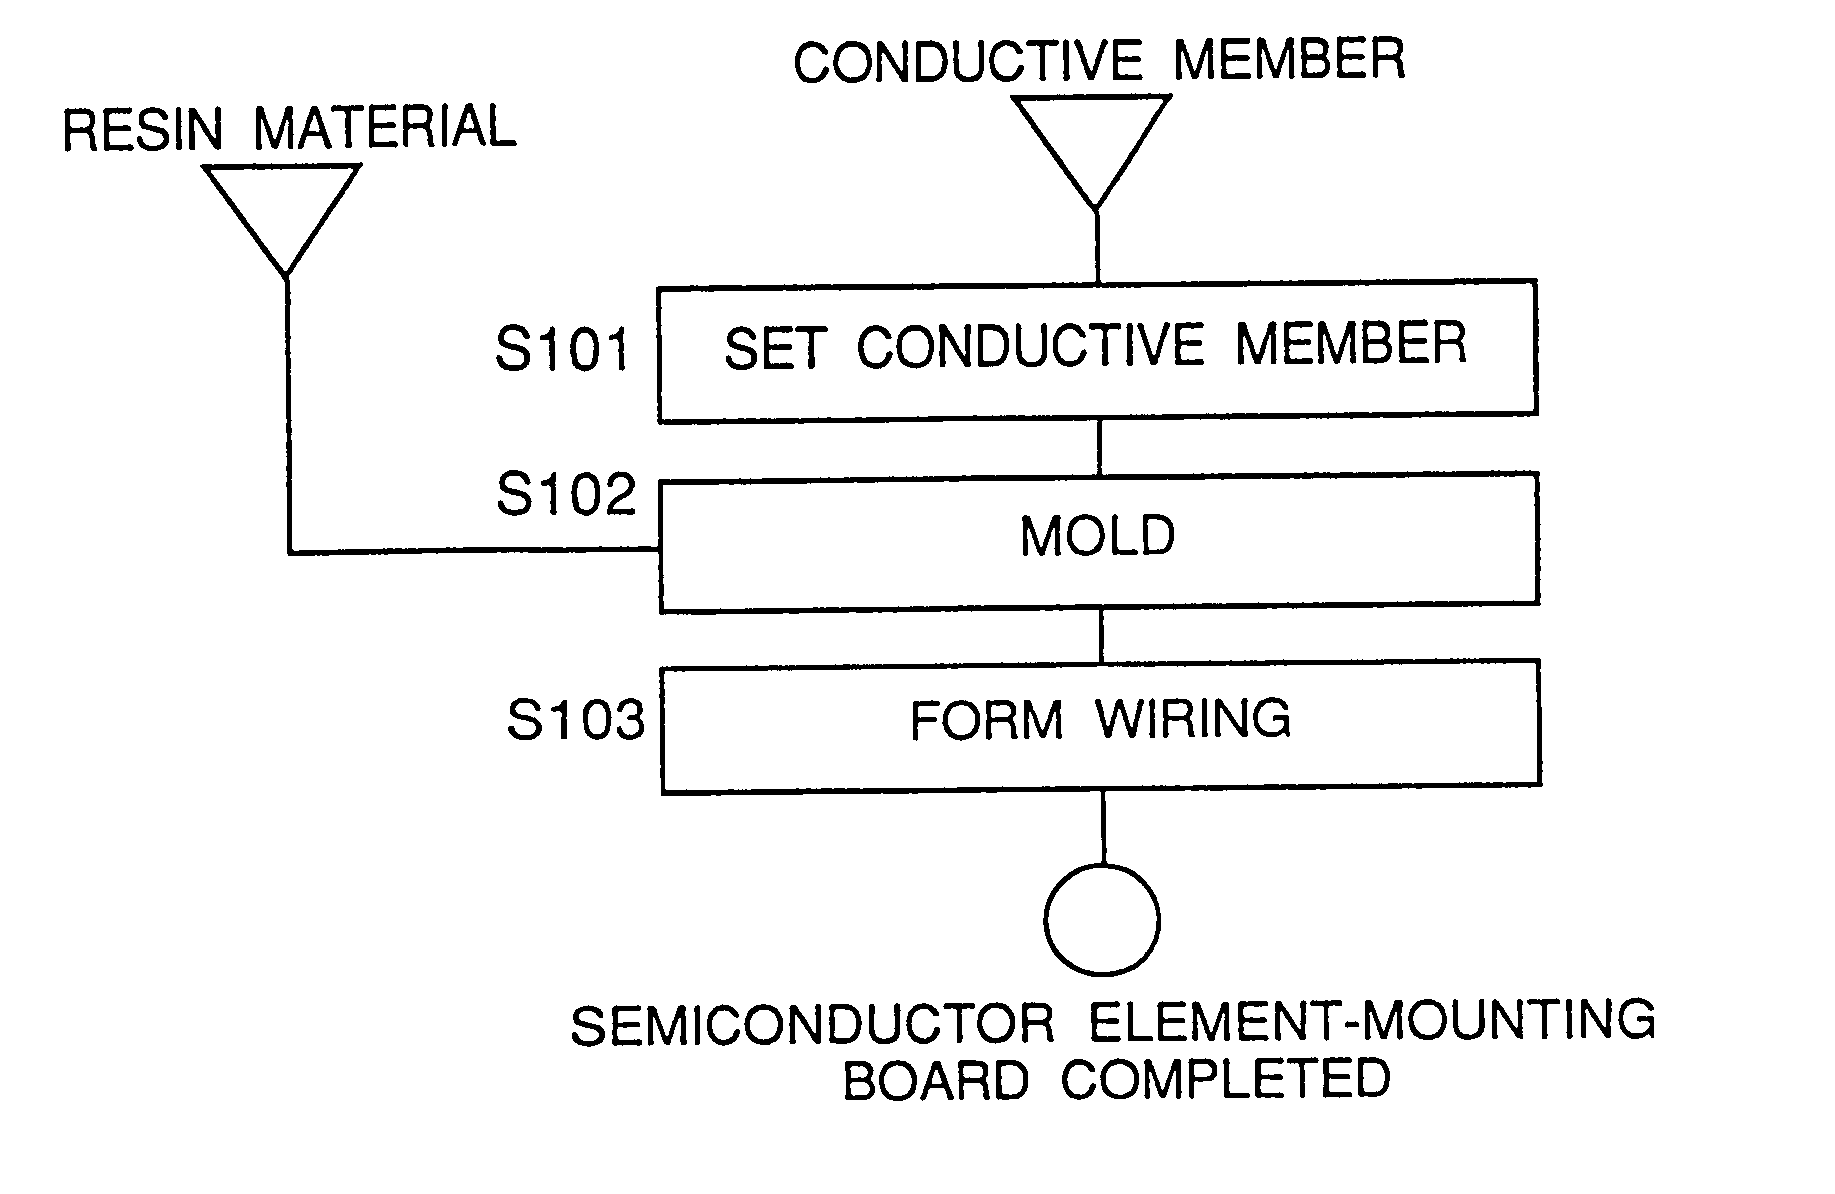 Method of manufacturing a semiconductor element-mounting board